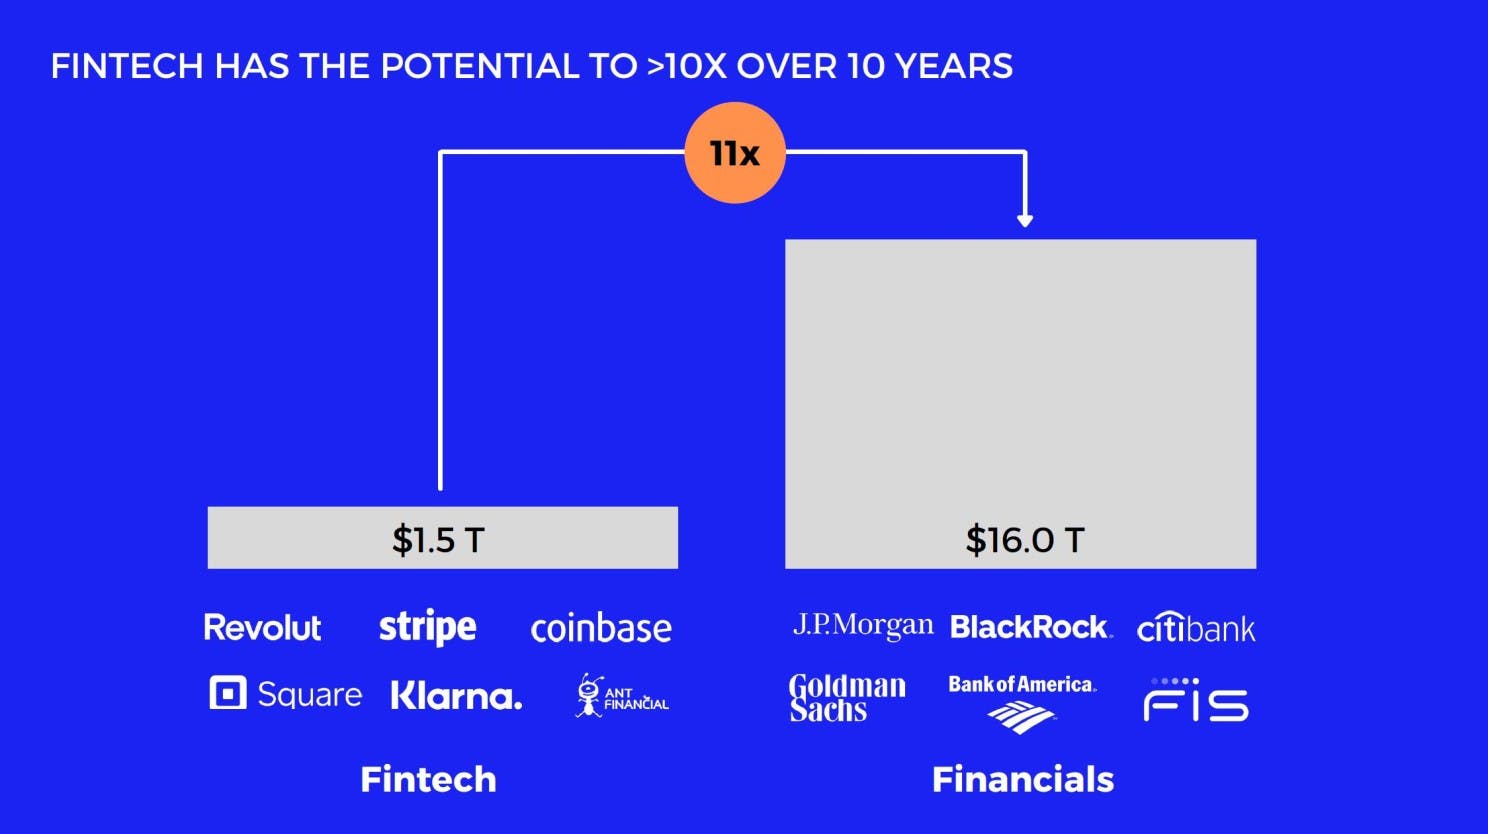 Fintech has the potential to 10x over 10 years